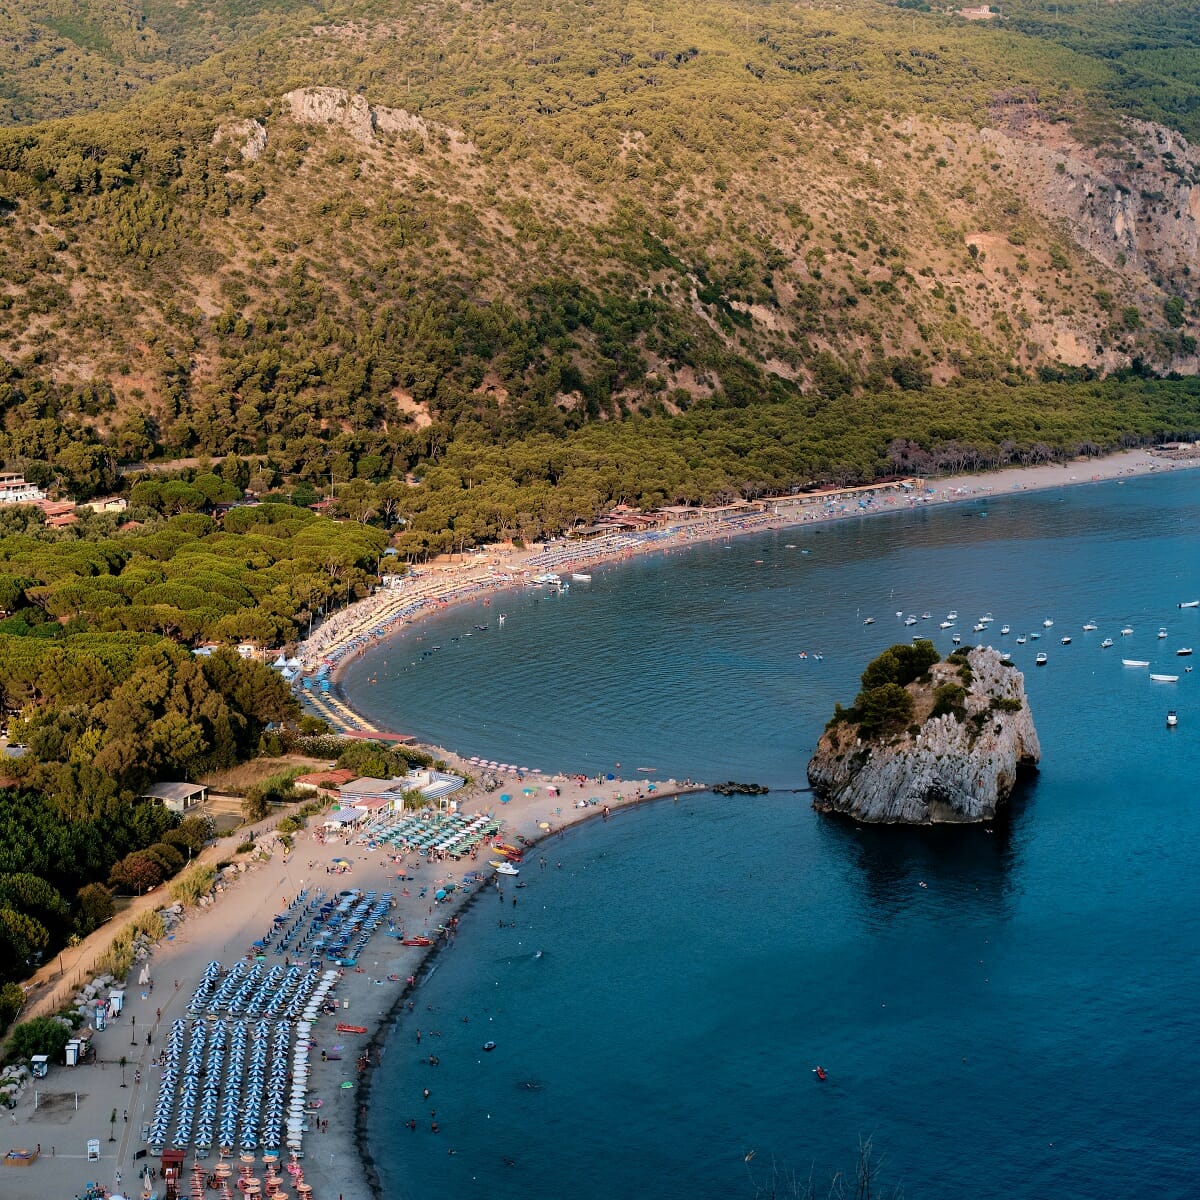 Coast of Cilento, Italy with beachside views, mountains, and a small island